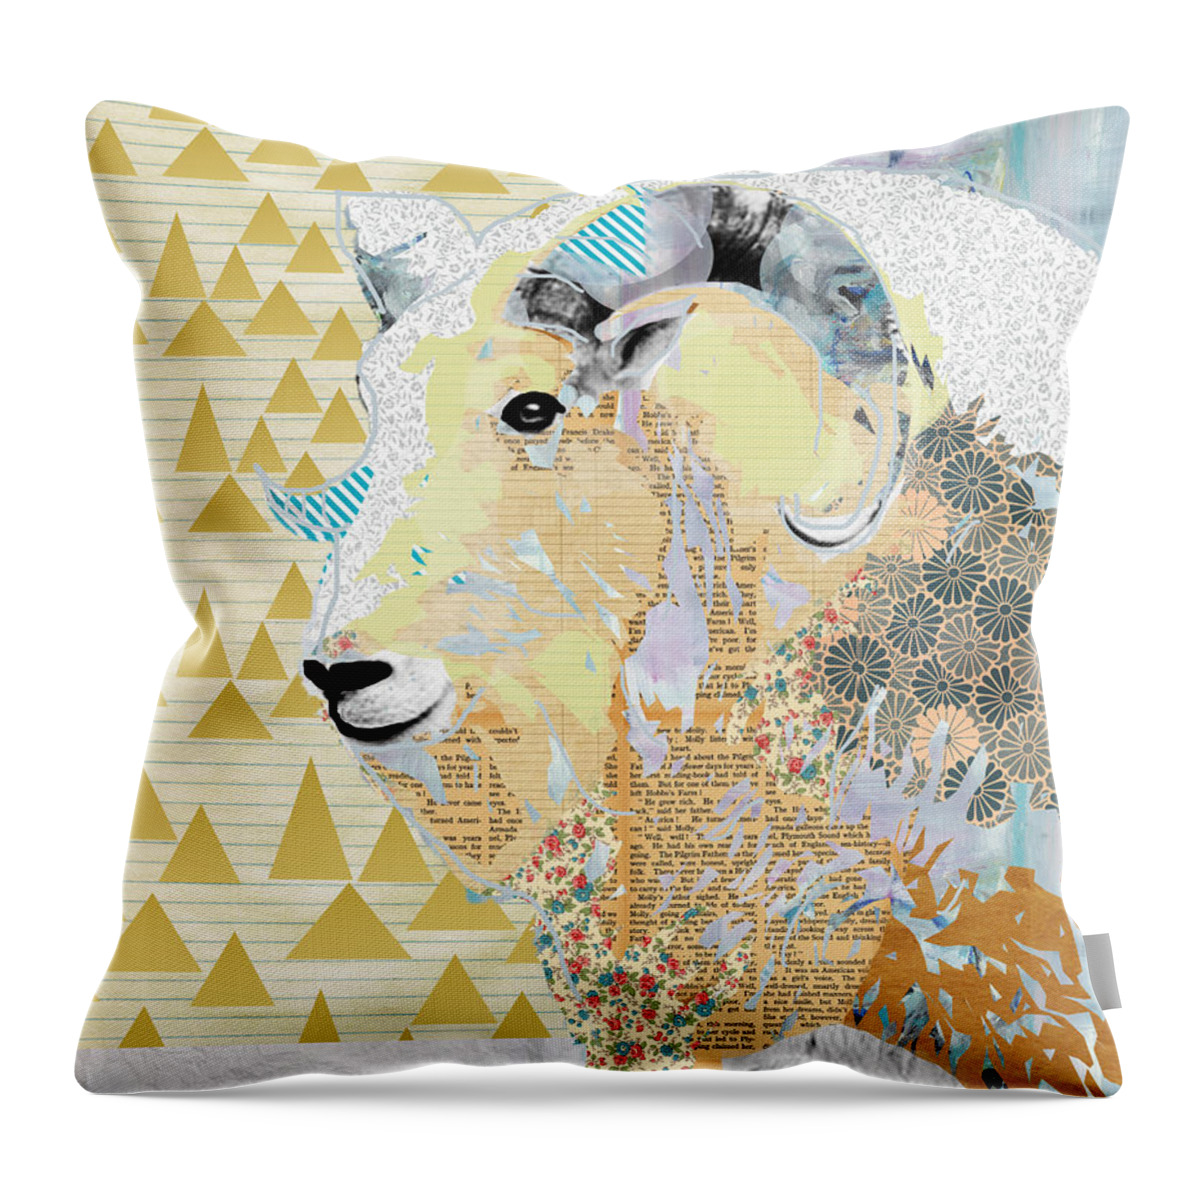 Mountain Throw Pillow featuring the mixed media Mountain Goat Collage by Claudia Schoen